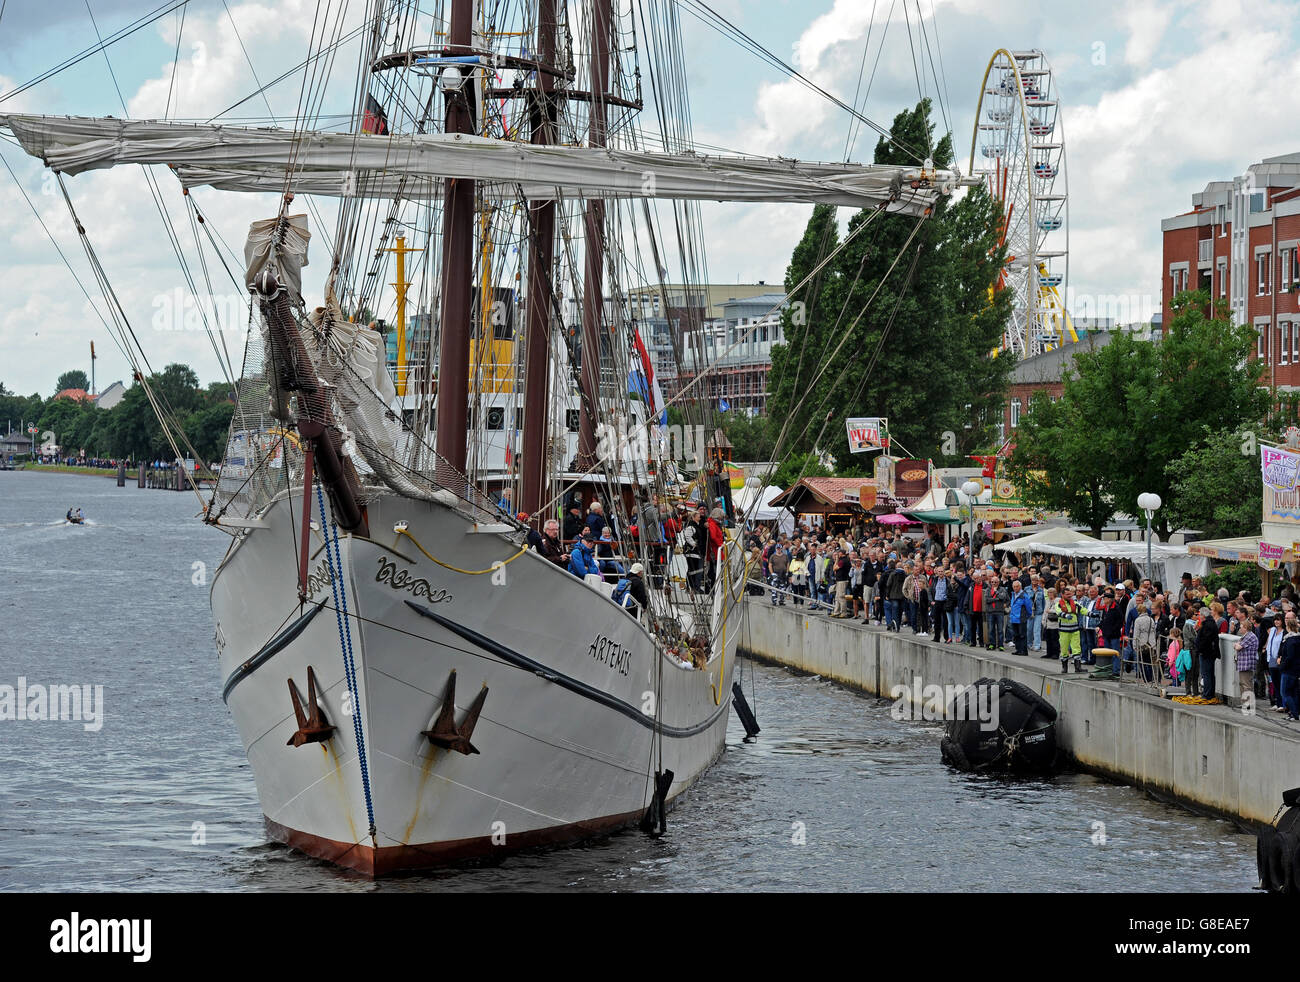 Wilhelmshaven, Germany. 2nd July, 2016. The Dutch bark 'Artemis' visiting the 42nd Weekend in Wilhelmshaven, Germany, 2 July 2016. The city festival is known as one of the biggest maritime summer festivals in the North-West. This year, the event is suffering from unsteady weather conditions. PHOTO: INGO WAGNER/dpa/Alamy Live News Stock Photo